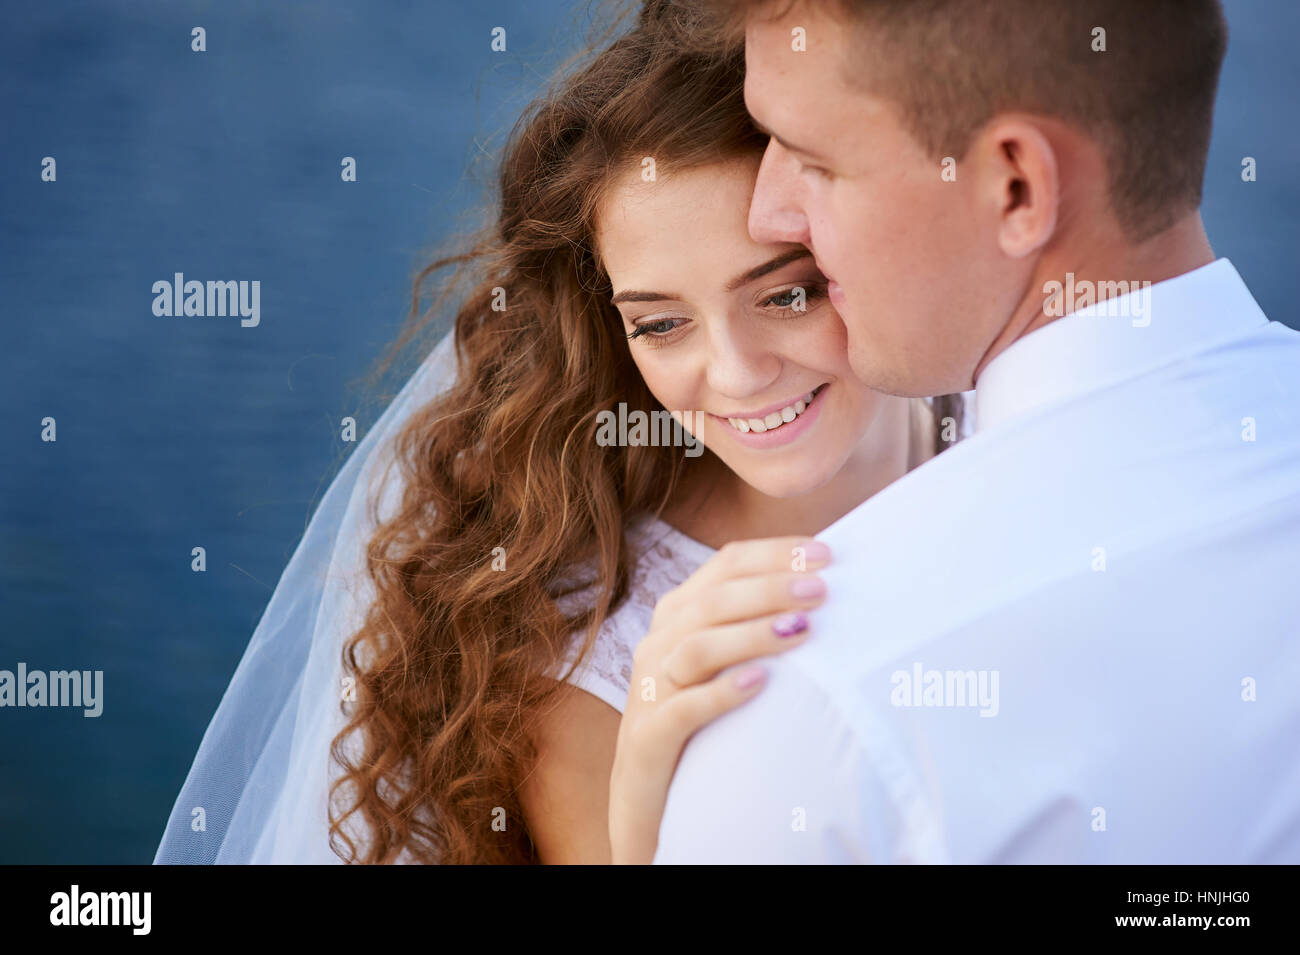 bride and groom embracing at the lake for a walk Stock Photo